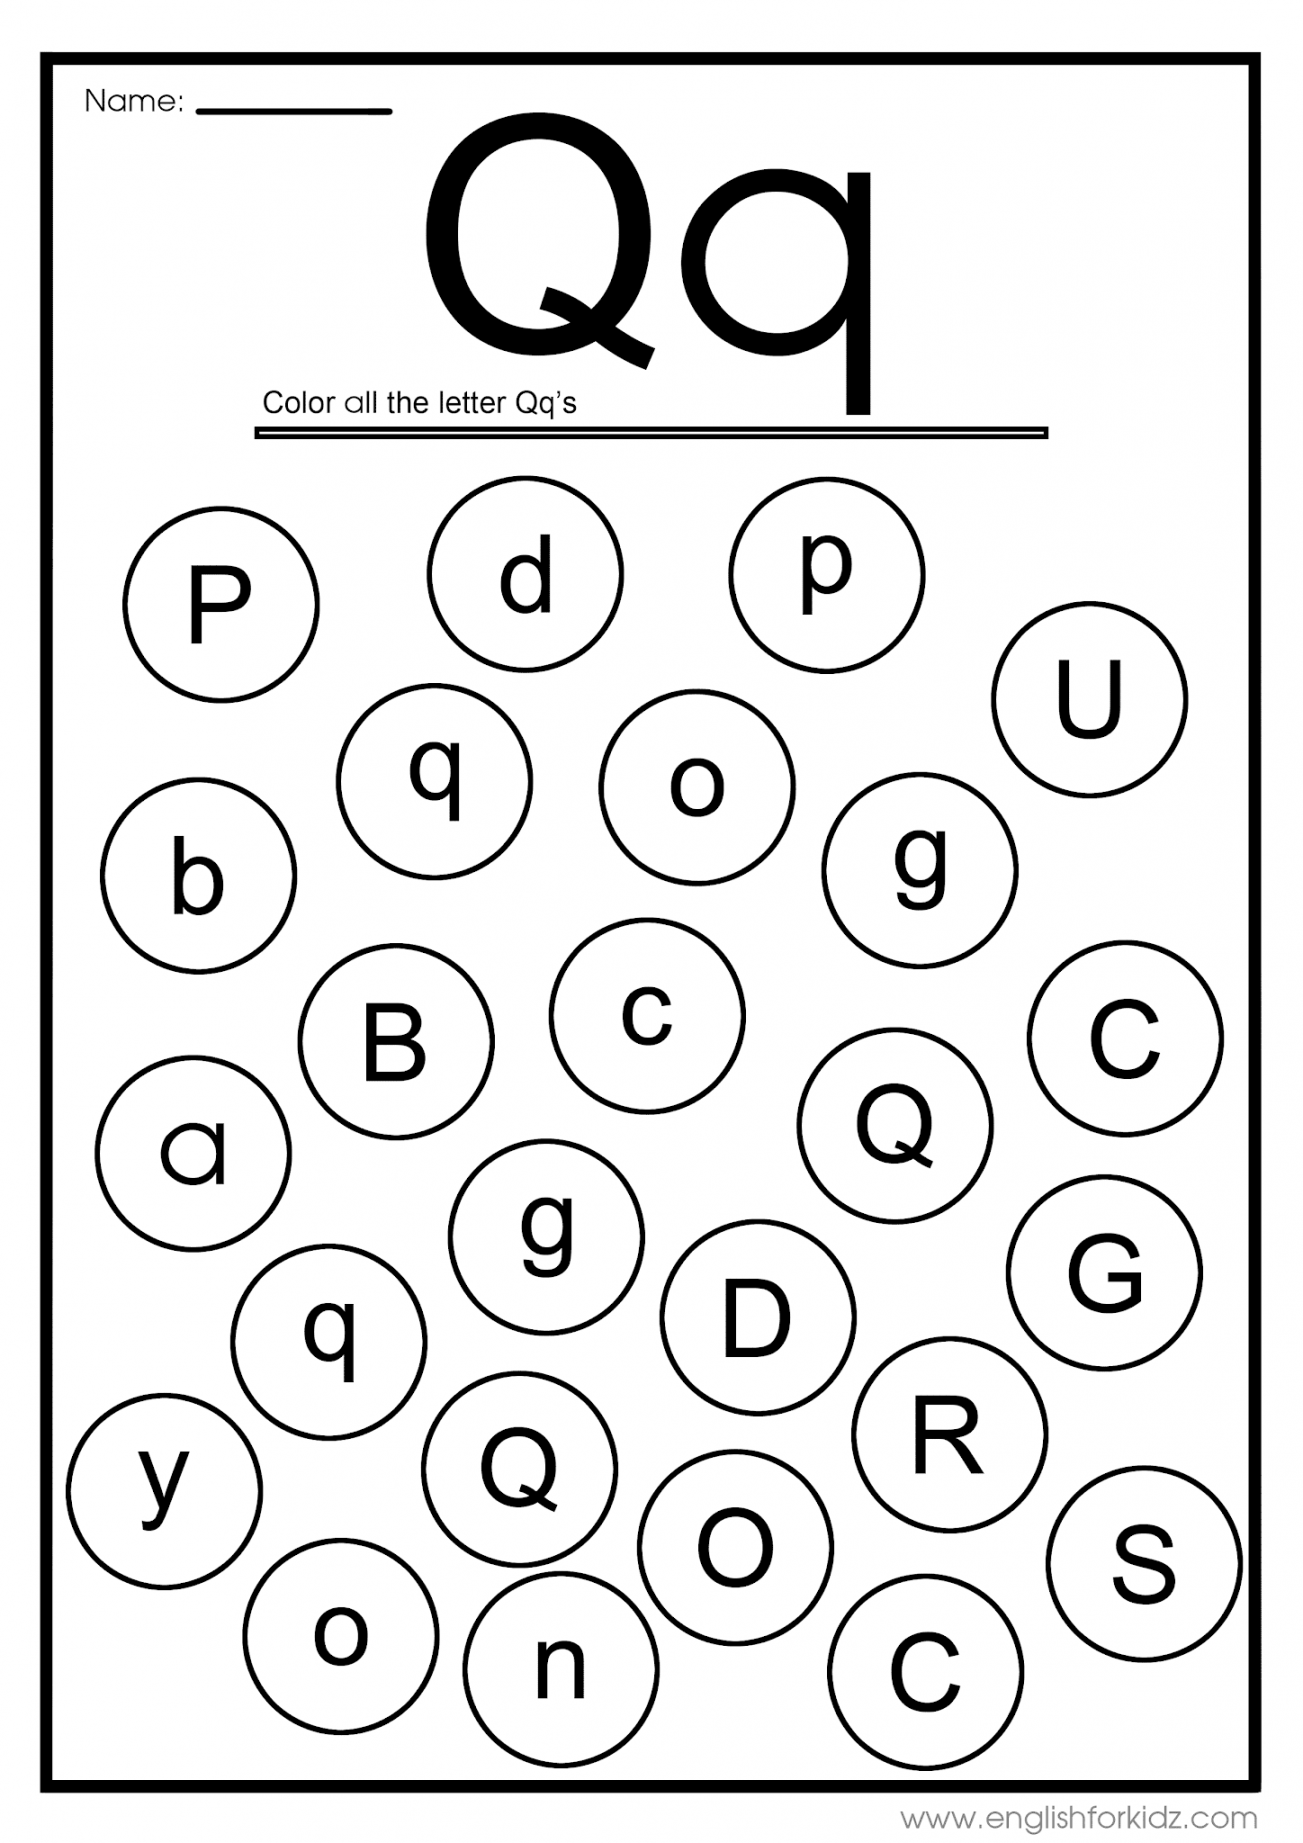 English for Kids Step by Step: Letter Q Worksheets, Flash Cards